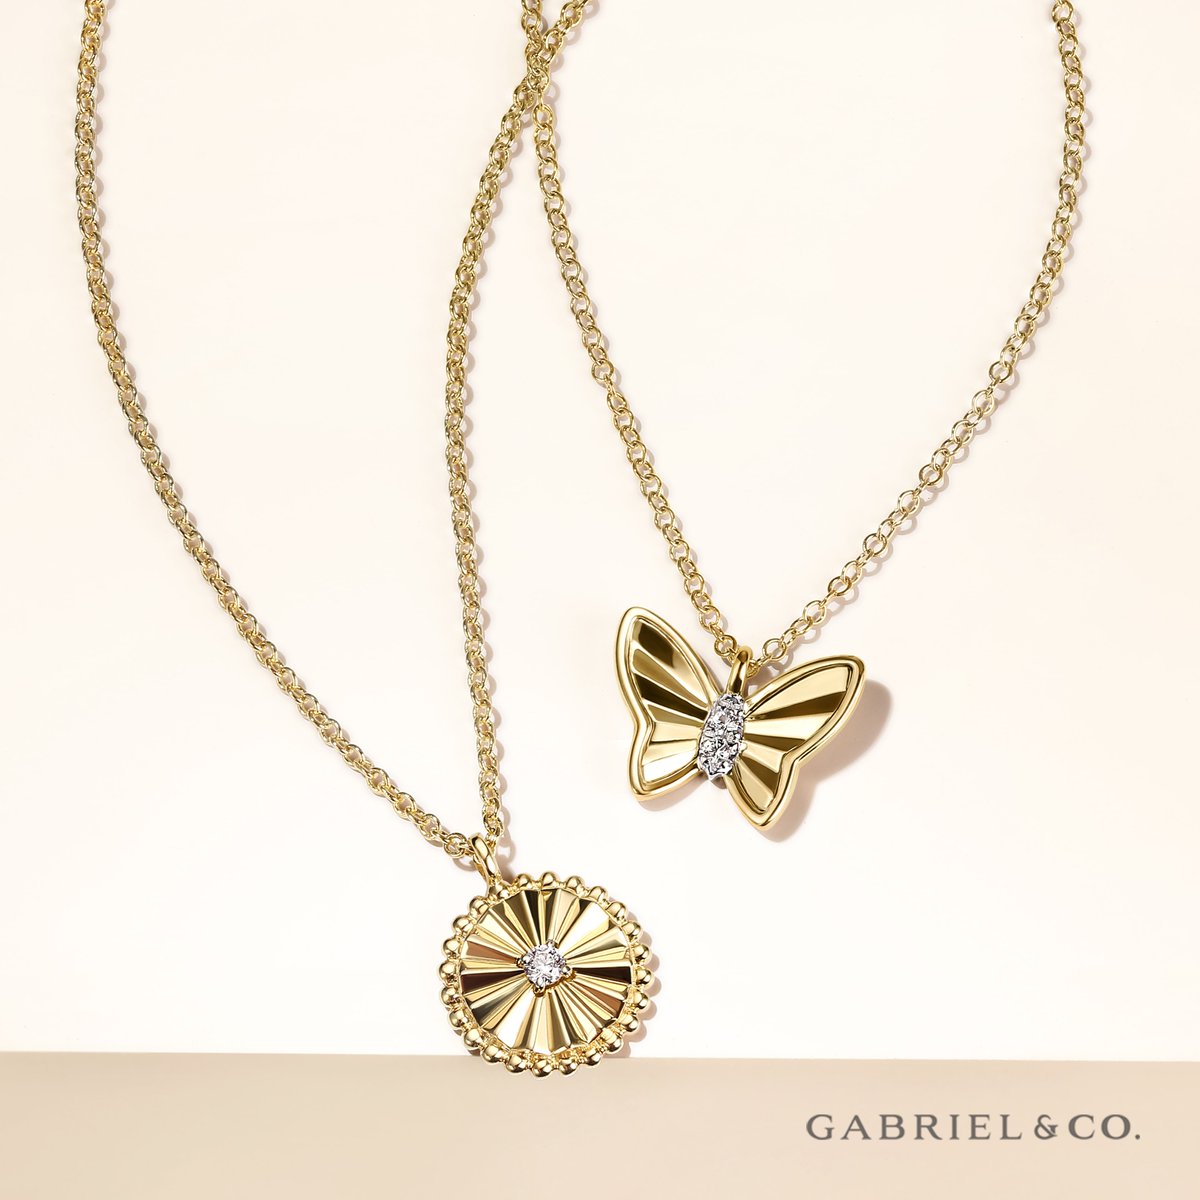 Mom deserves the best this Mother's Day. Check out our amazing collection from Gabriel & Co. to find her the perfect gift!

#gabrielandcoretailer #gabrielny #gabrielandco #mothersdaygiftguide #dunkinsdiamonds